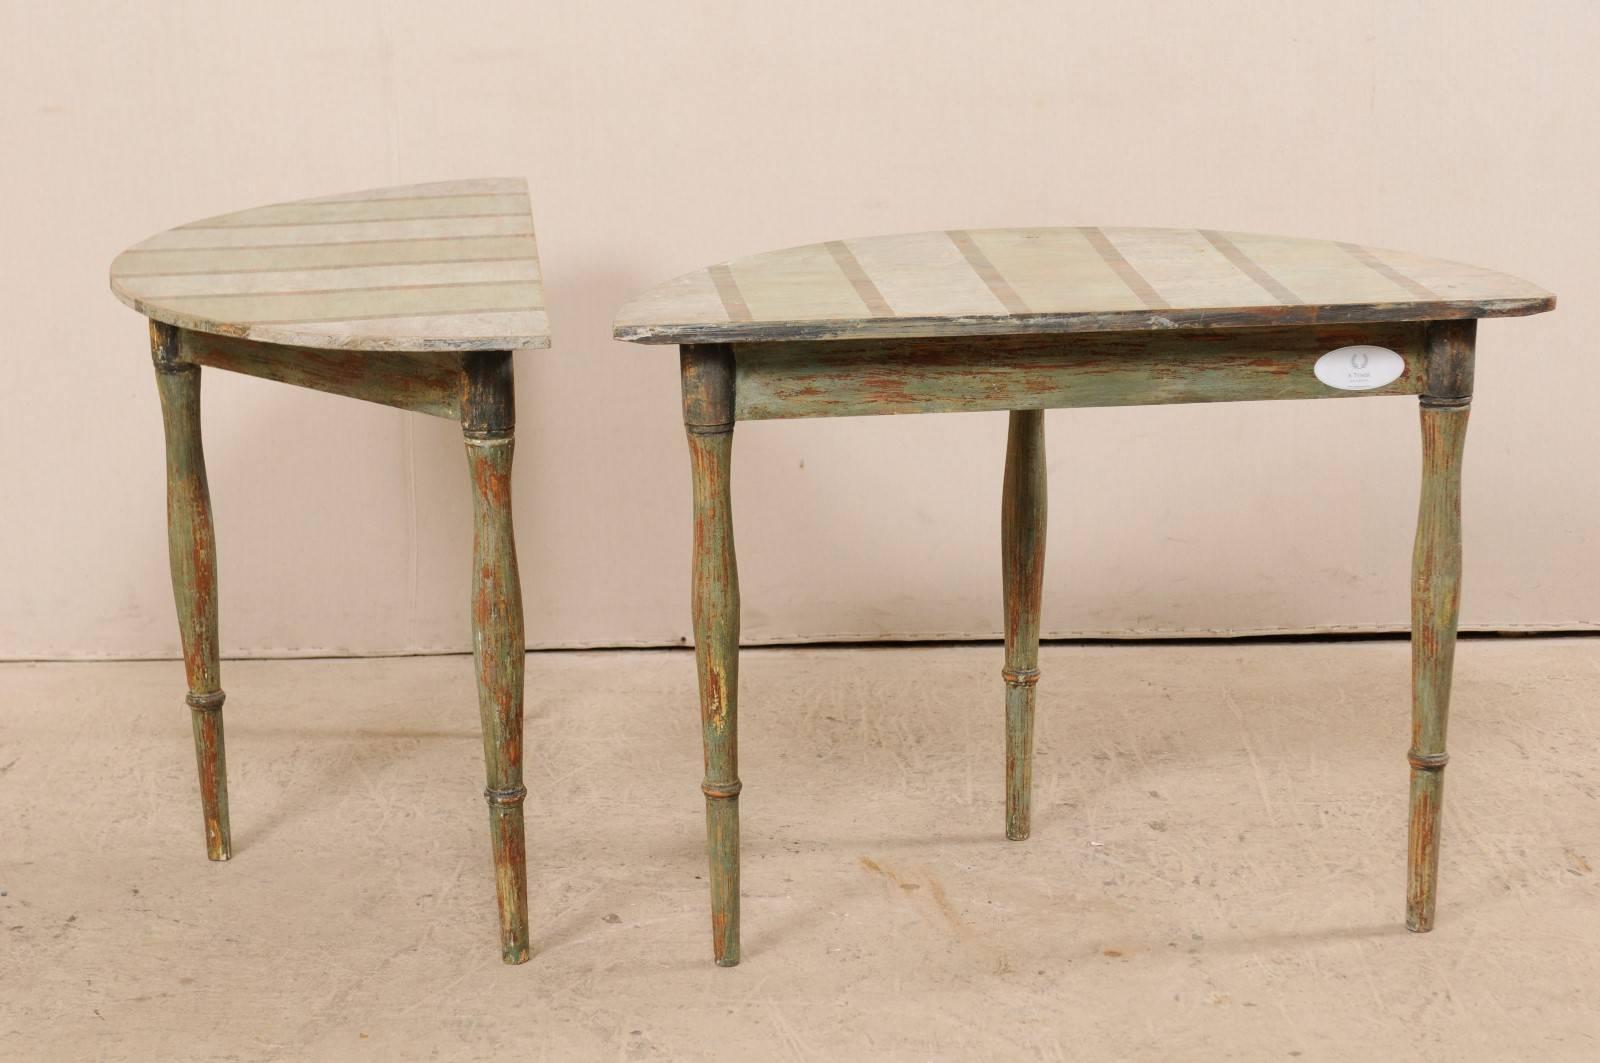 Pair of Swedish 19th Century Painted Wood Demilune Tables with Subtle Stripes 5